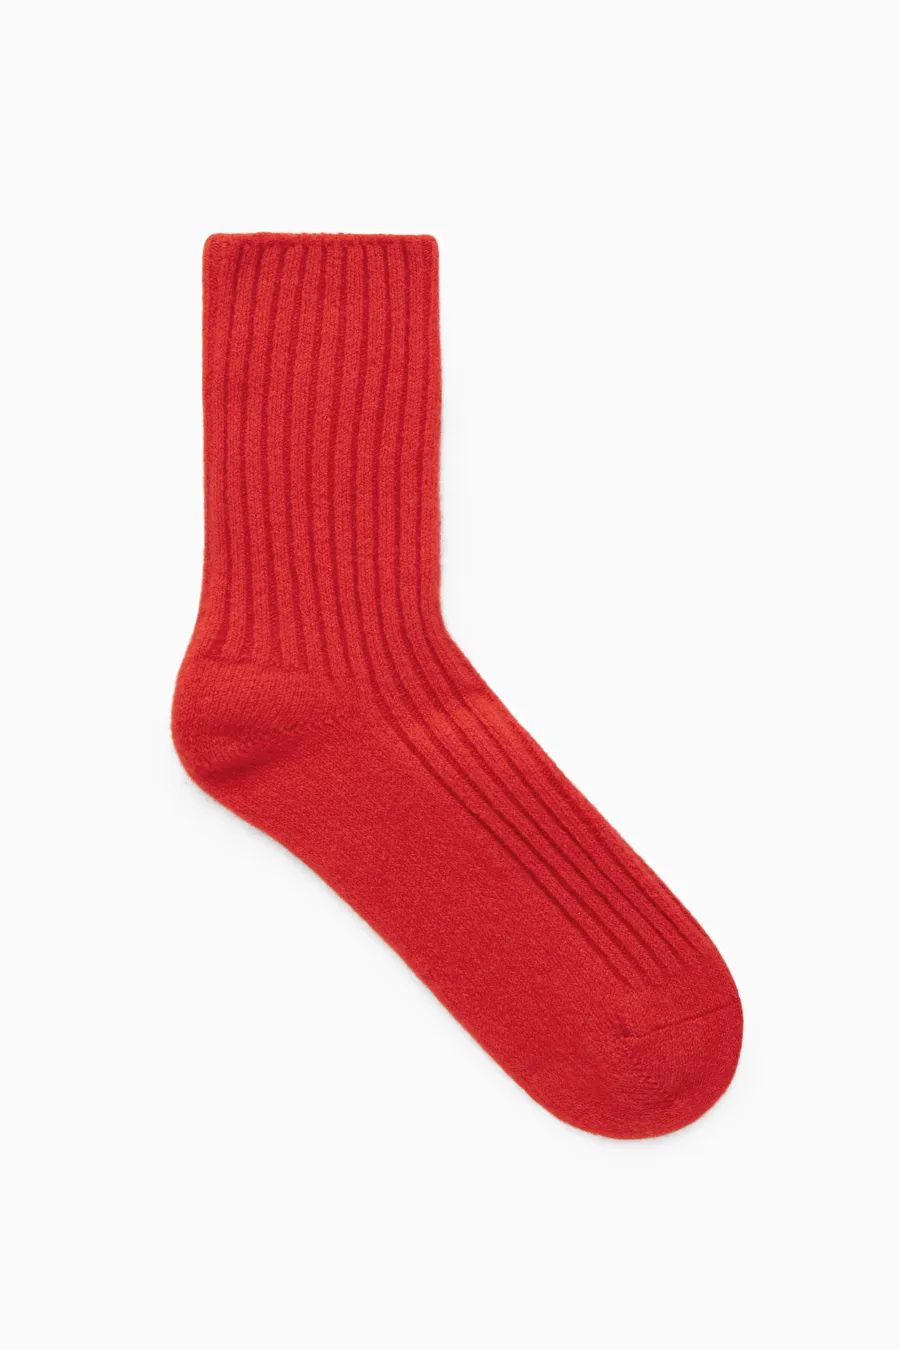 RIBBED CASHMERE SOCKS - BRIGHT RED - COS | COS UK